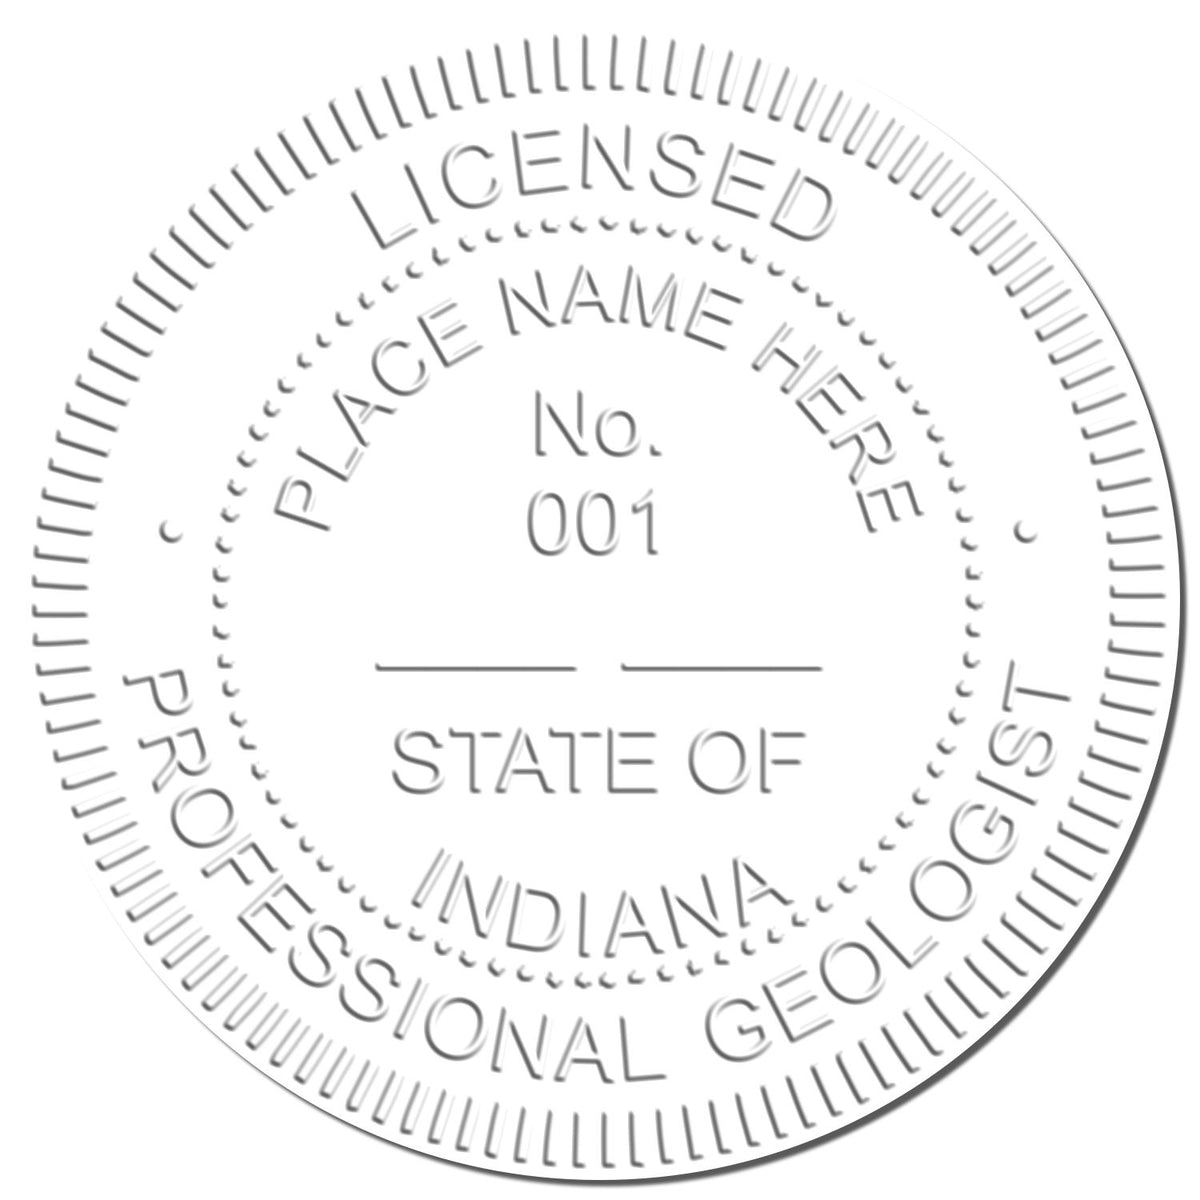 This paper is stamped with a sample imprint of the Handheld Indiana Professional Geologist Embosser, signifying its quality and reliability.